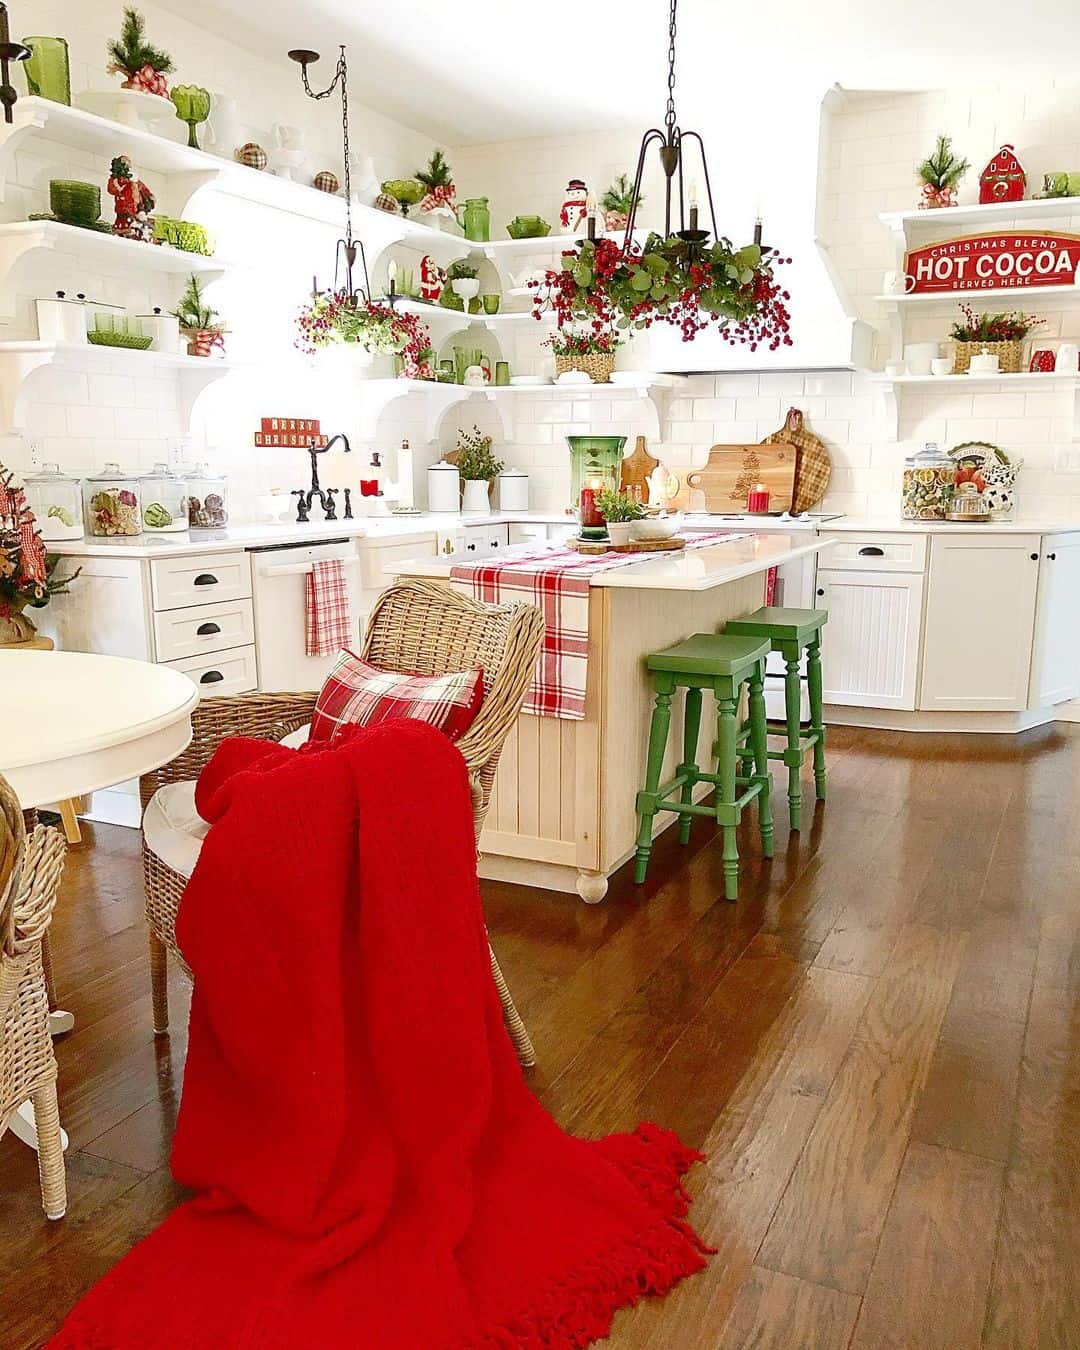 Green and Red Kitchen Accessories in a Festive Kitchen - Soul & Lane